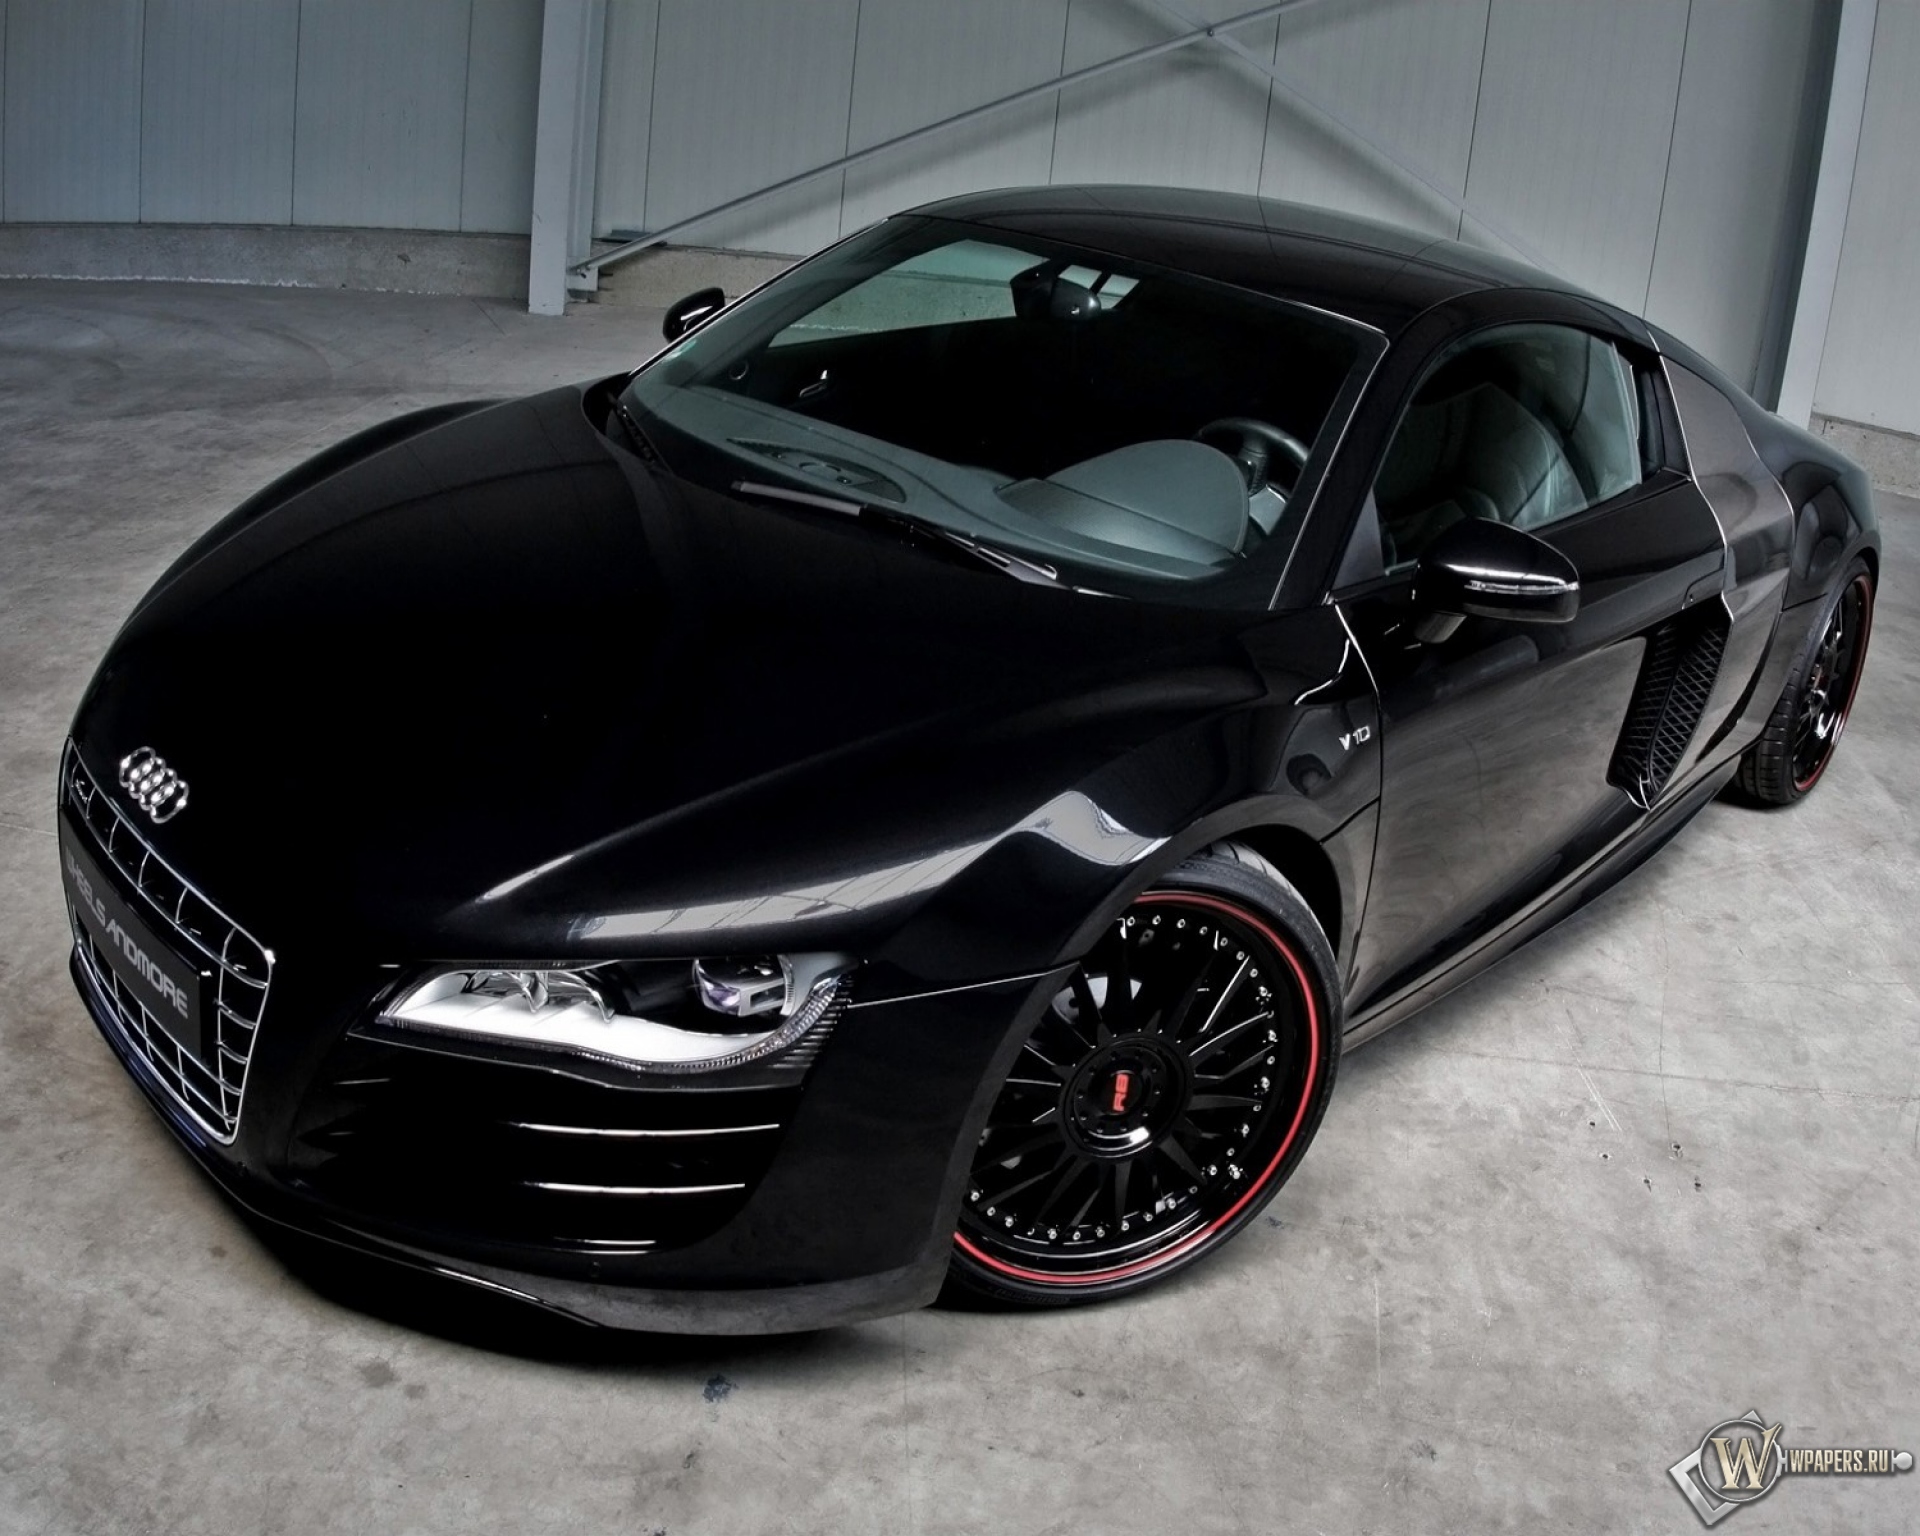 2011 Wheelsandmore Audi R8 V10 .6 - Front Angle Top 1920x1536